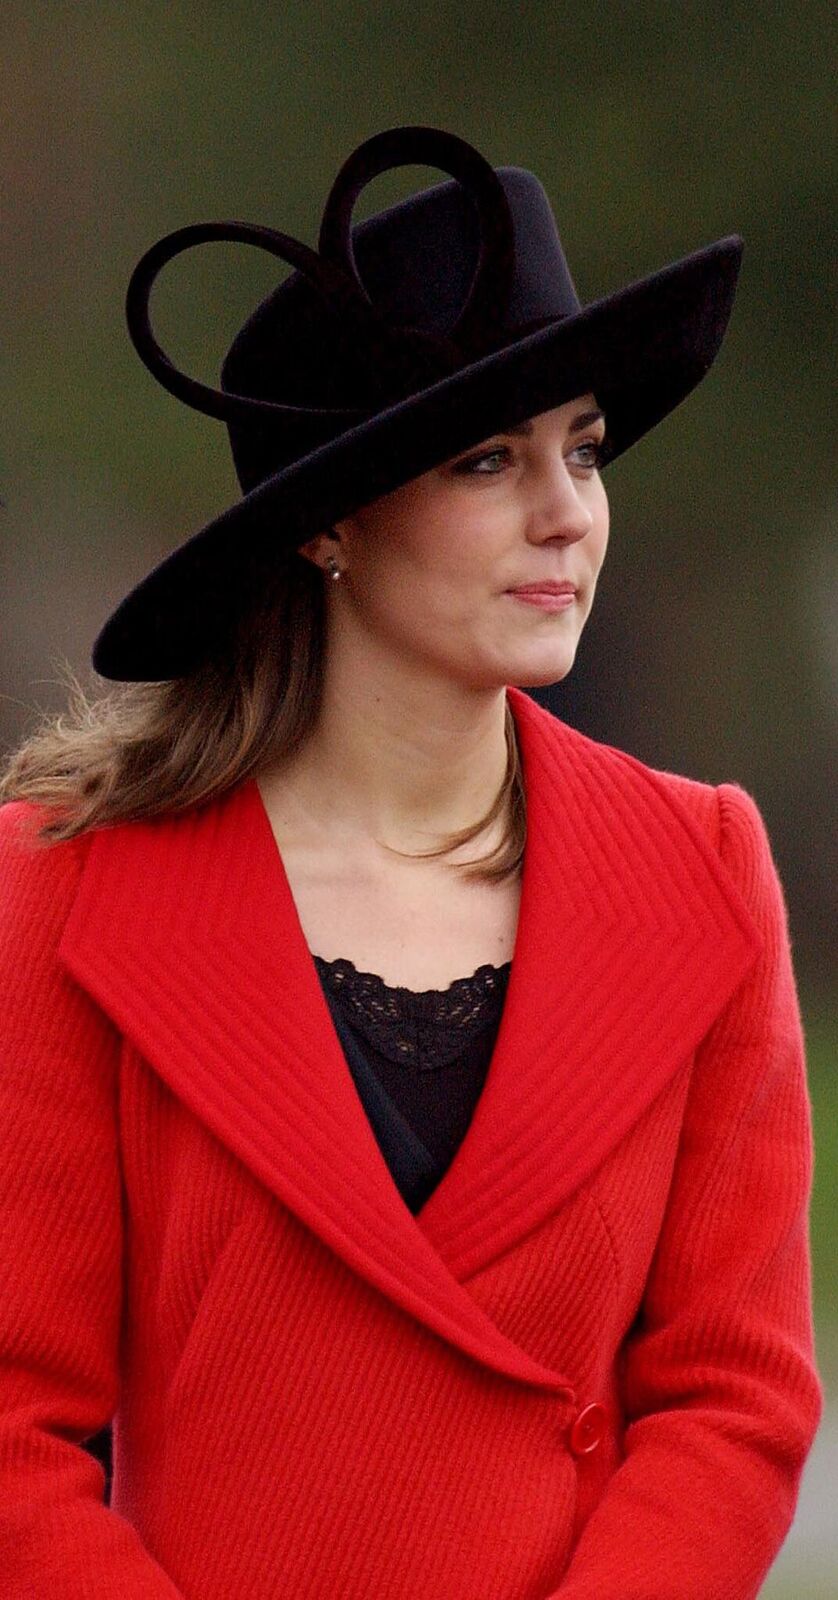 Kate Middleton, Prince Williams's girlfriend, attends the Sovereign's Parade at the Royal Military Academy Sandhurst on December 15, 2006 in Sandhurst, England | Source: Getty Images